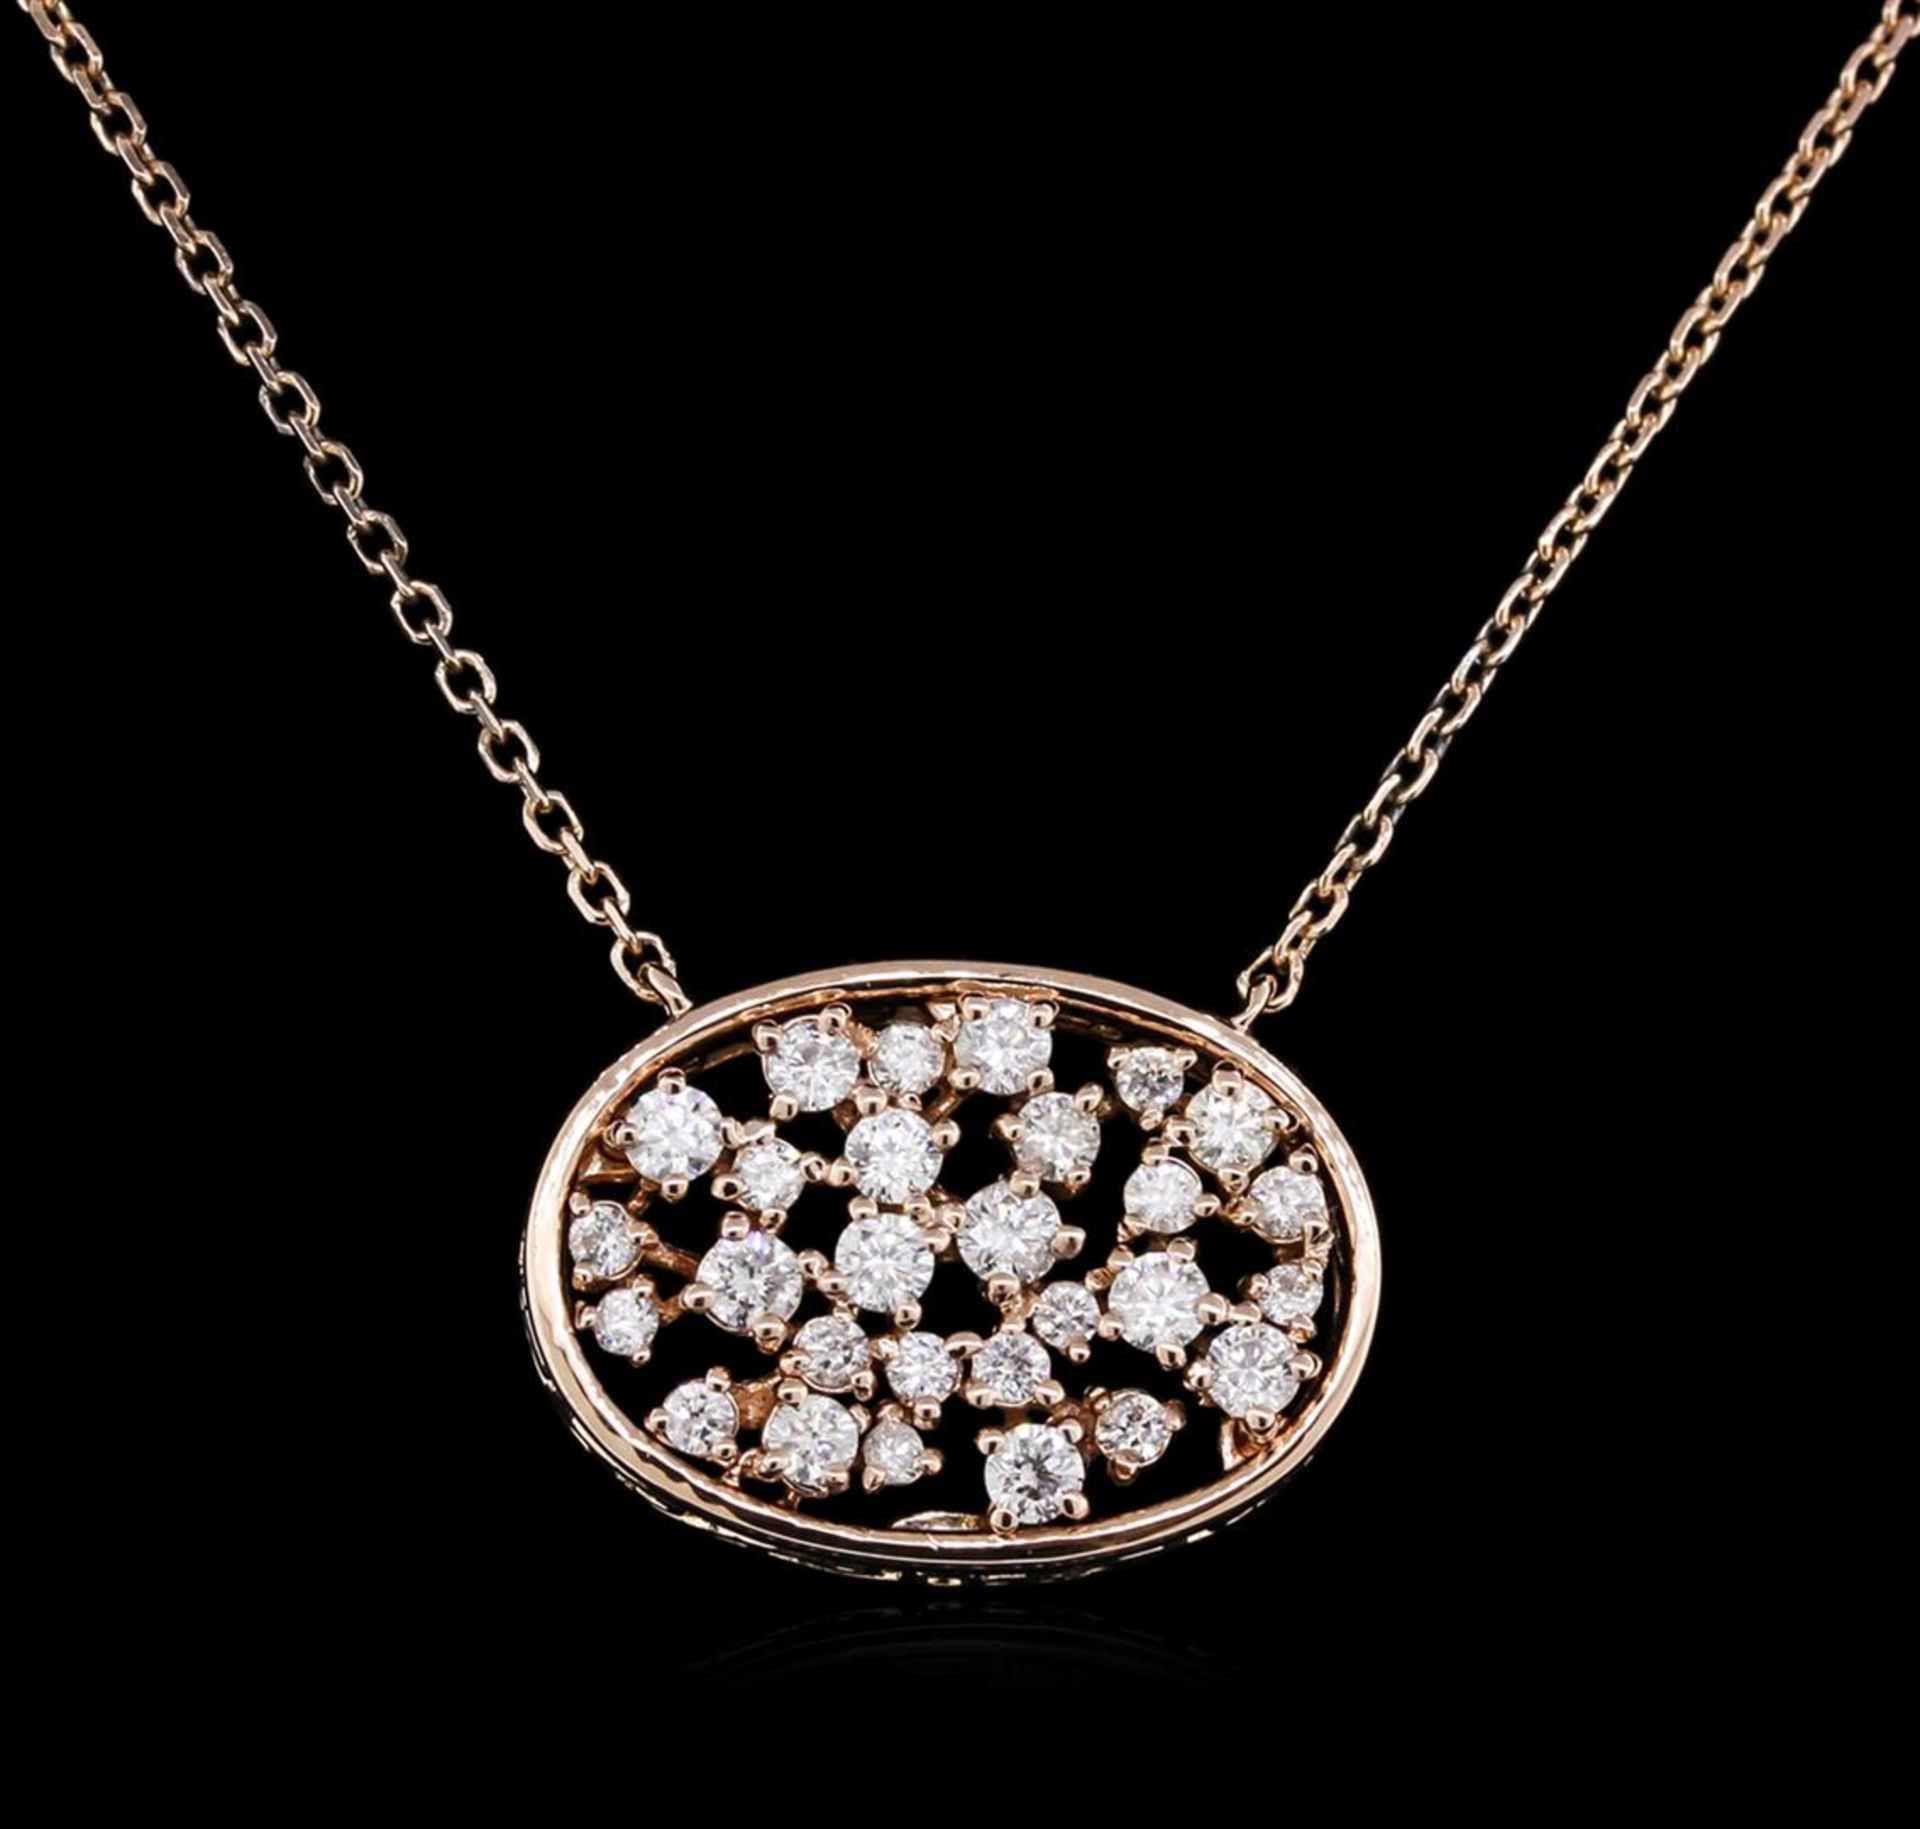 0.61 ctw Diamond Necklace - 14KT Rose Gold - Image 2 of 2